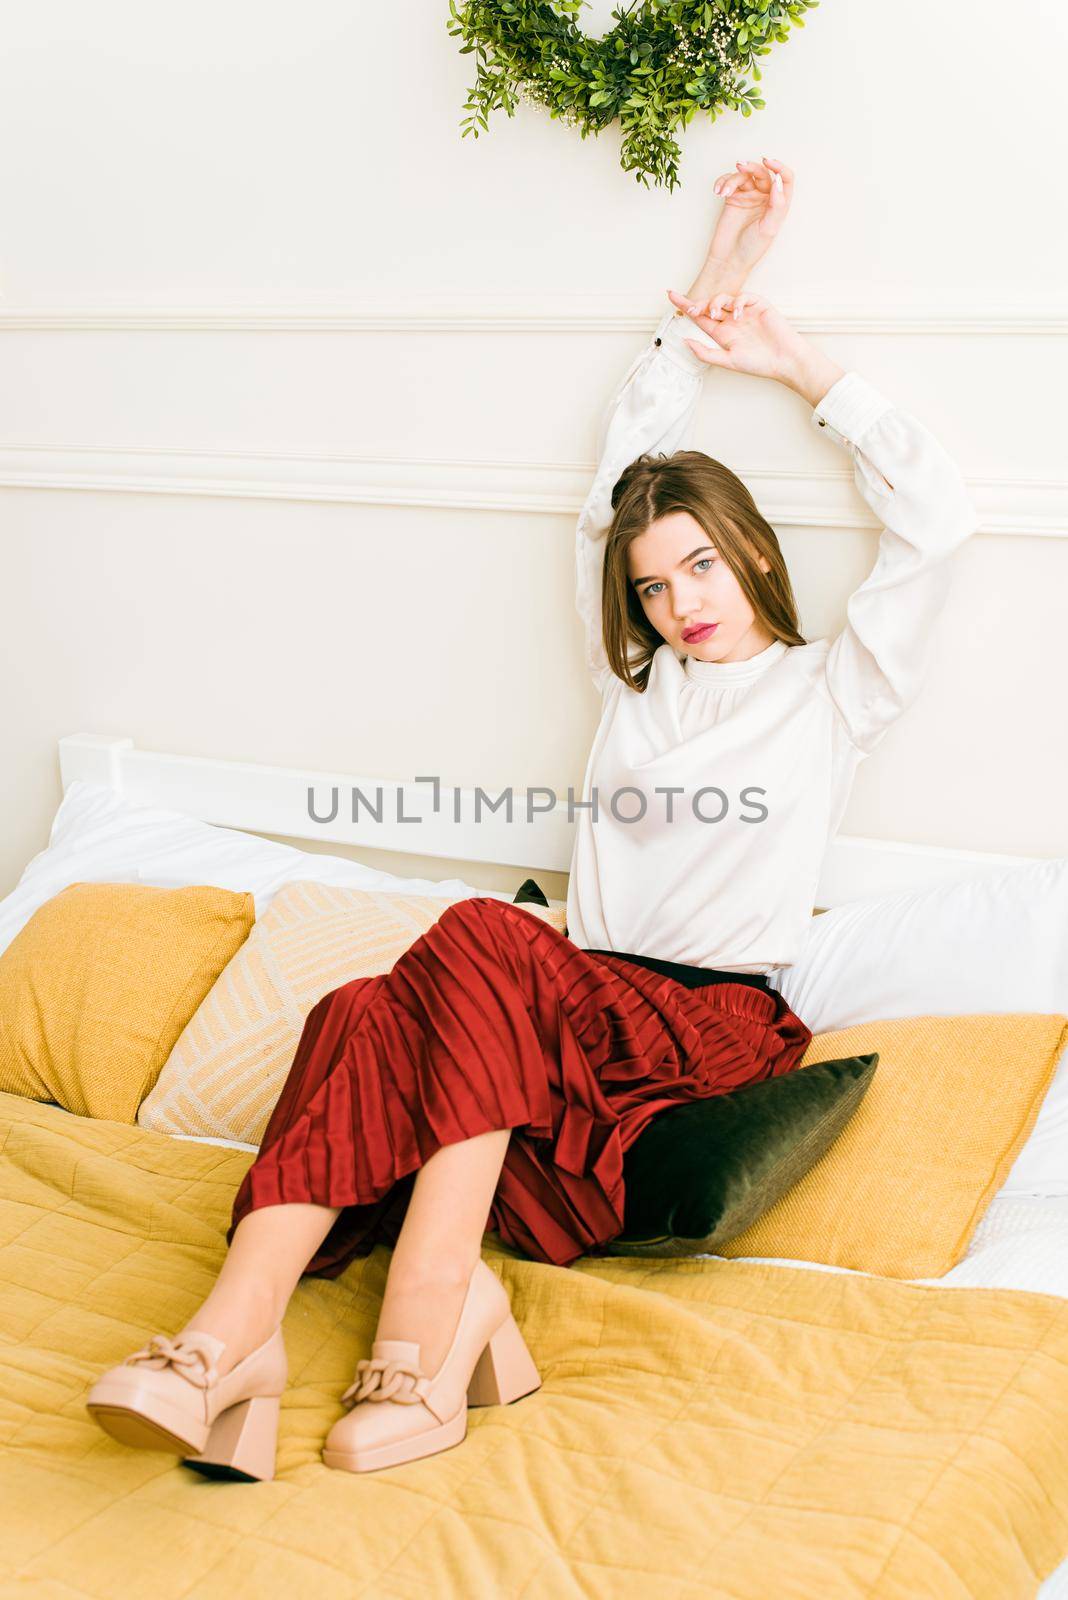 Portrait of fashionable women in red skirt, white blouse and stylish beige high-heeled shoes with a chain buckle posing in a bed. Girl with a big red lips